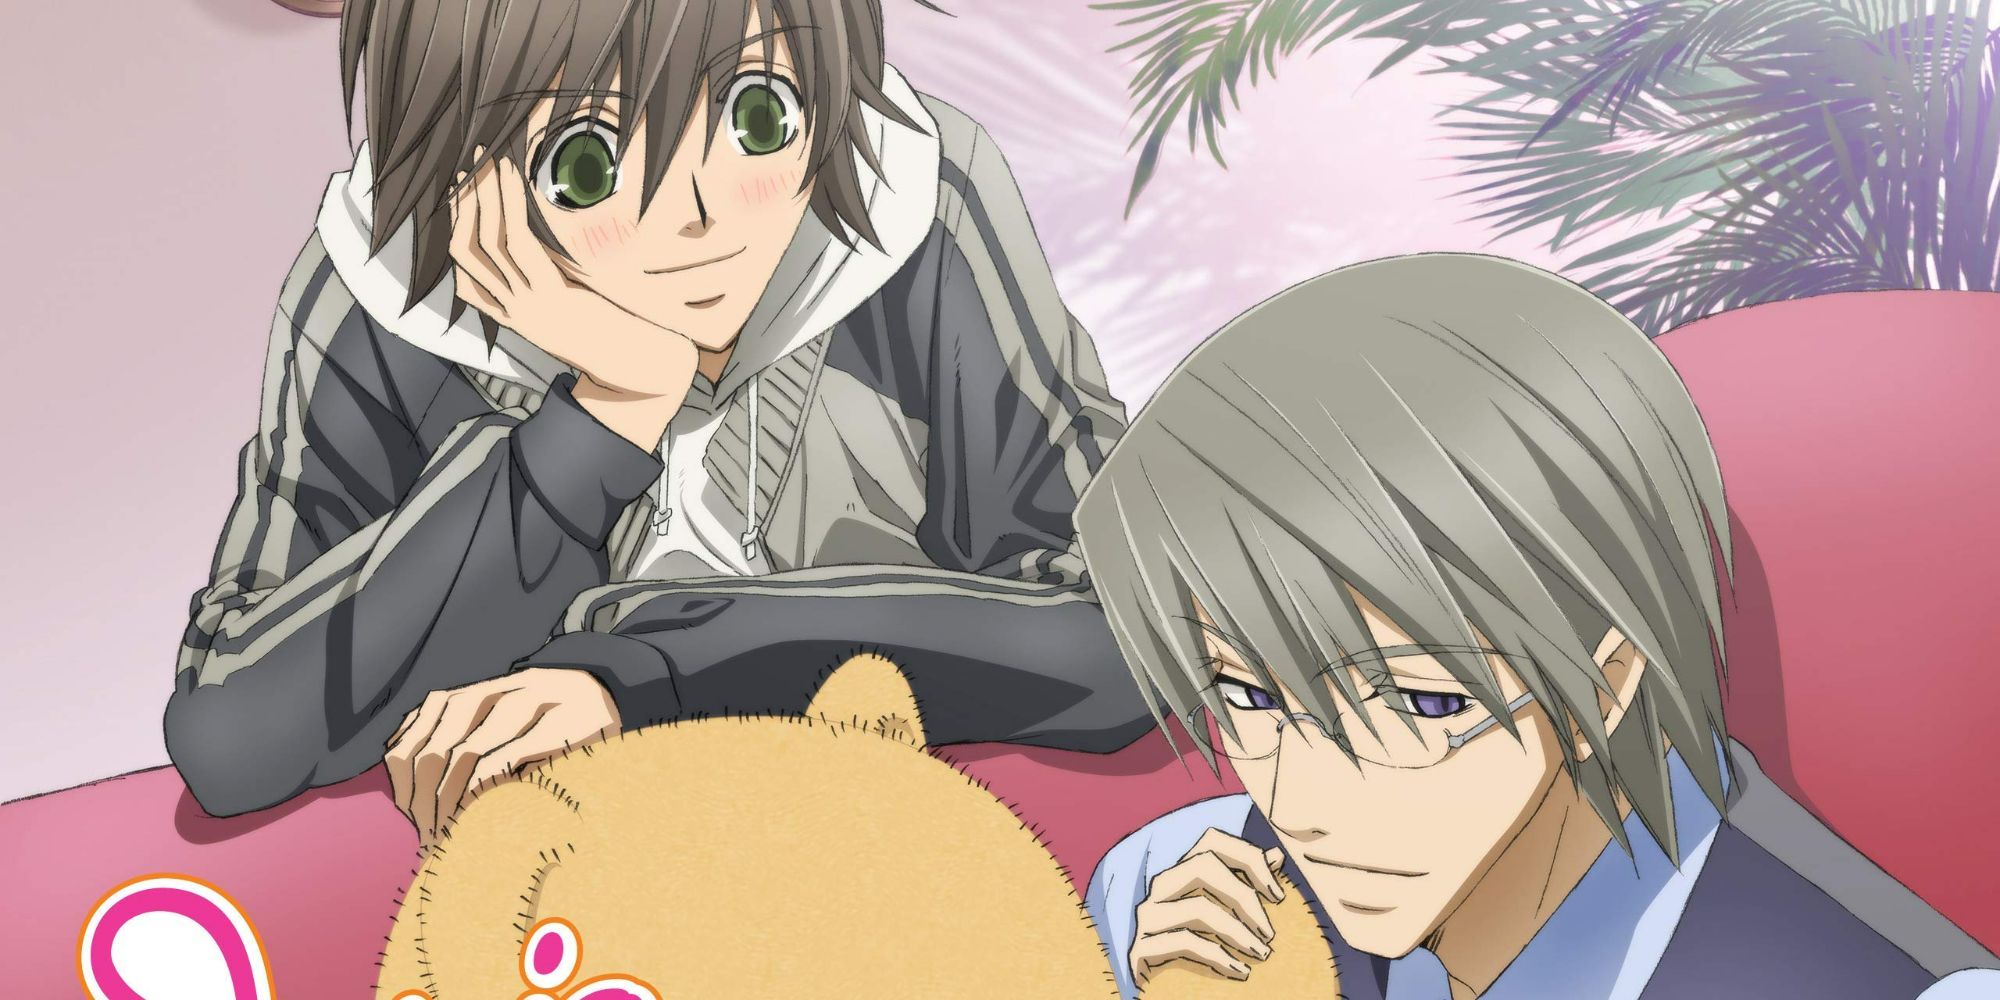 Two main characters from Junjo Romantica